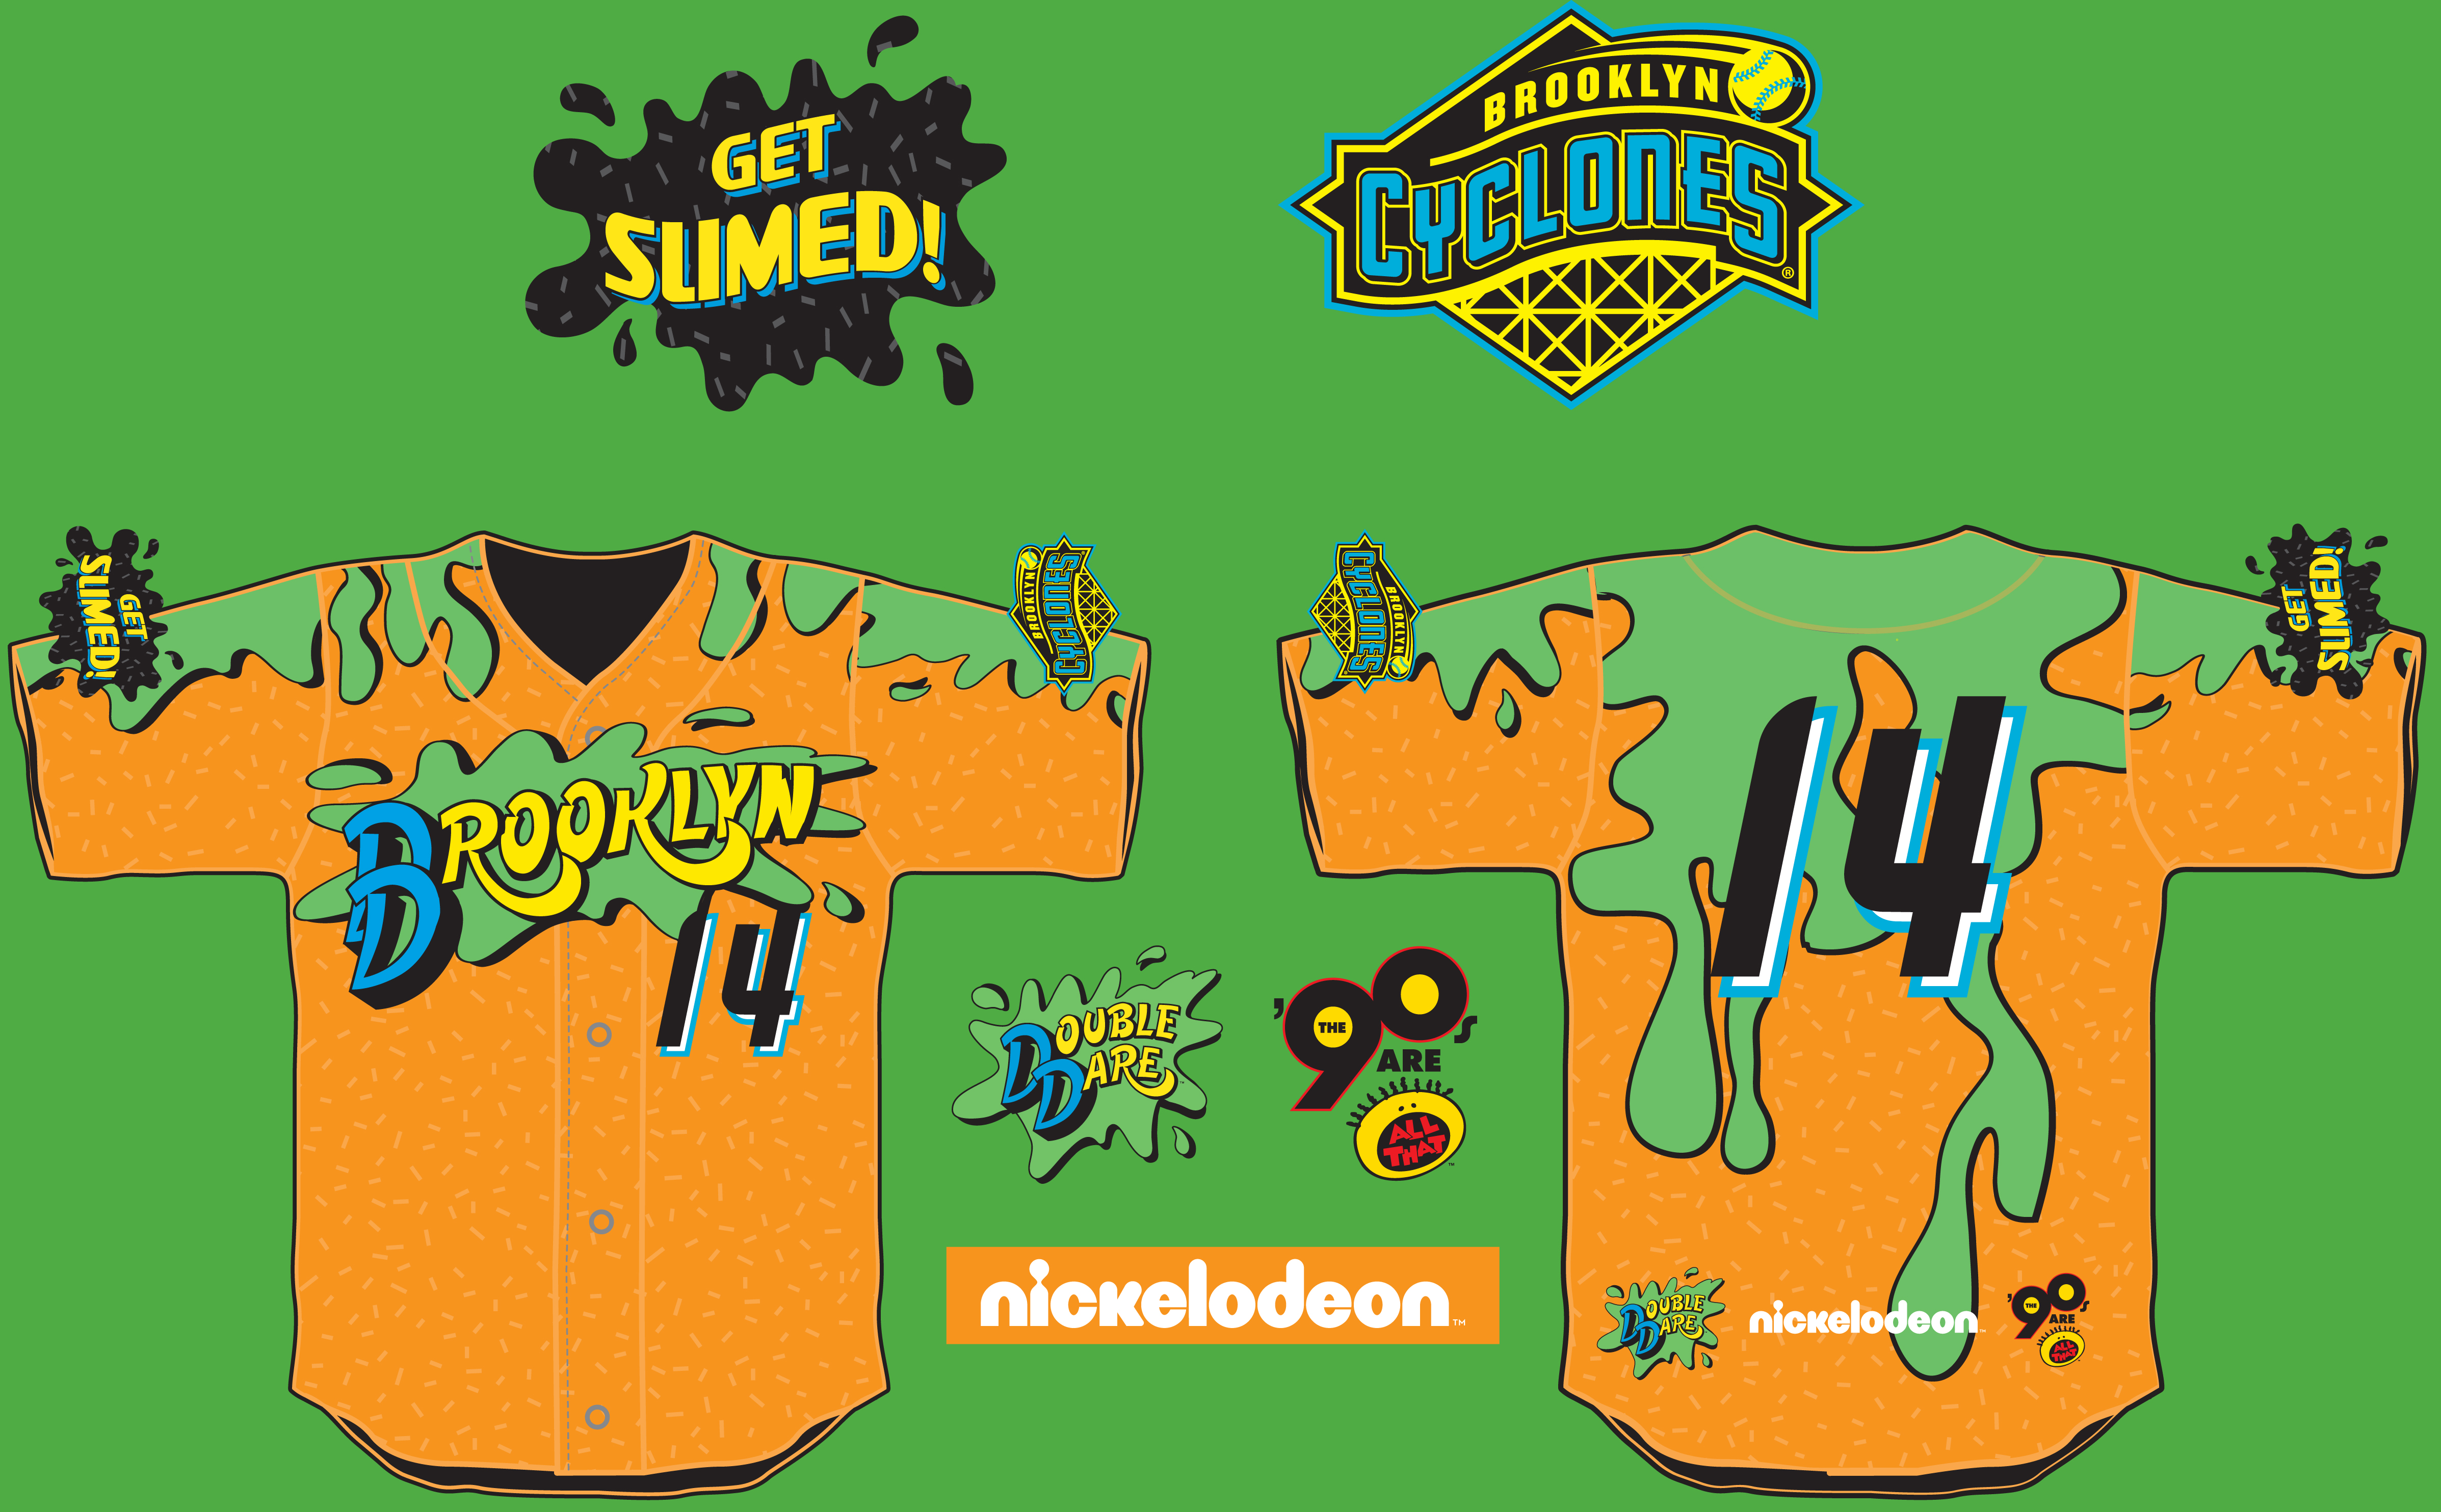 Brooklyn Cyclones To Host A Nickelodeon-Themed Night